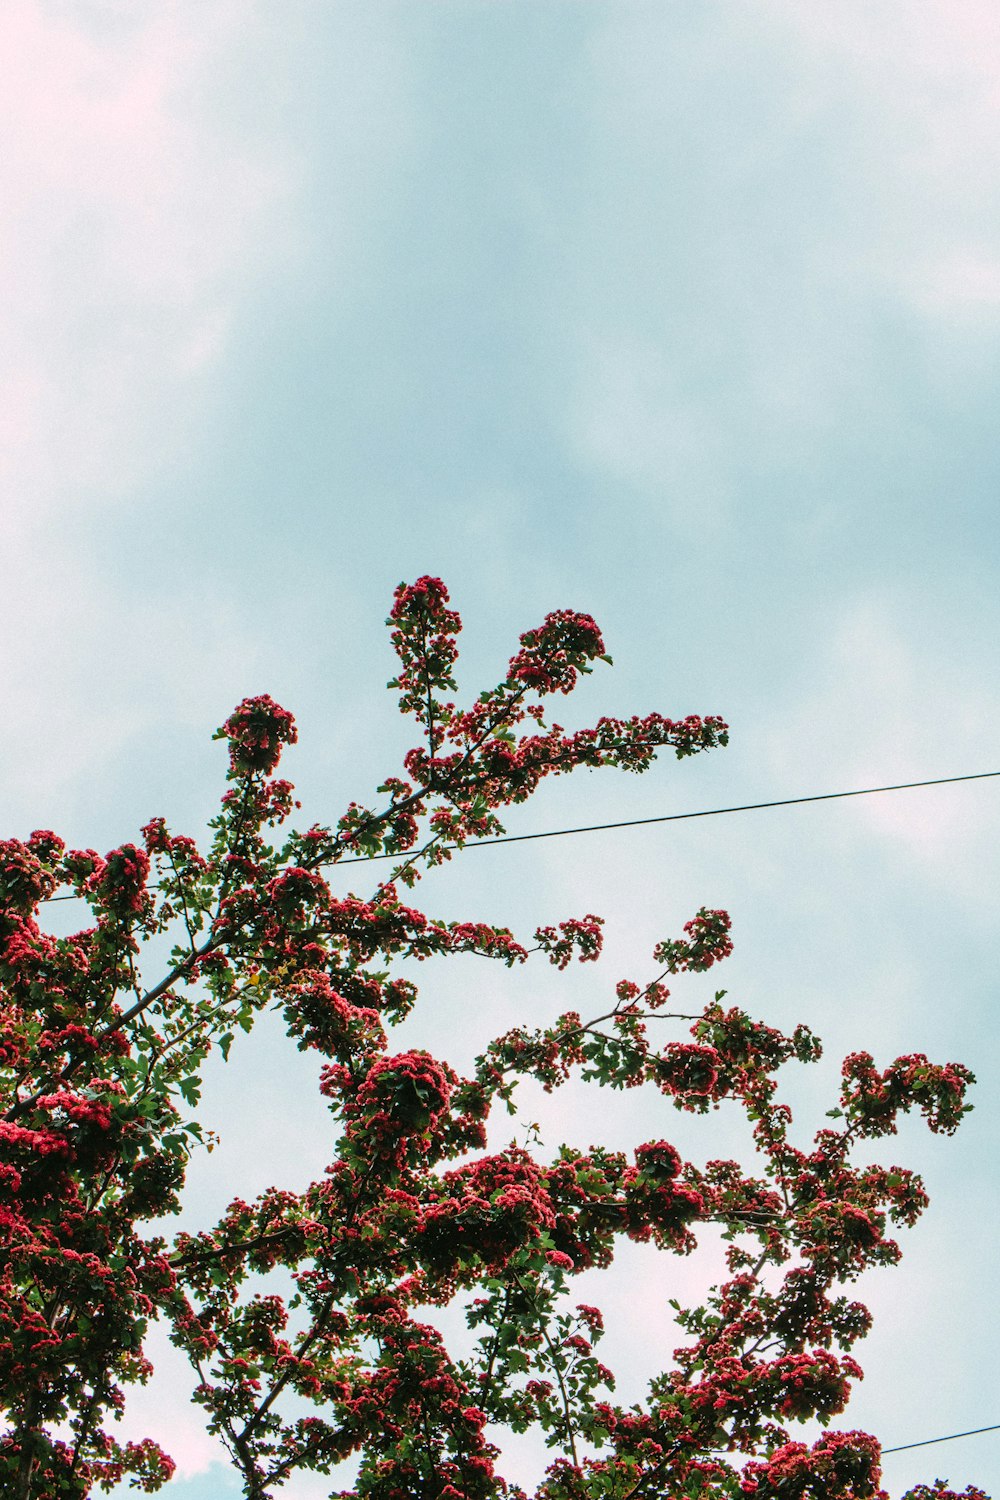 pink flowers on tree branch under cloudy sky